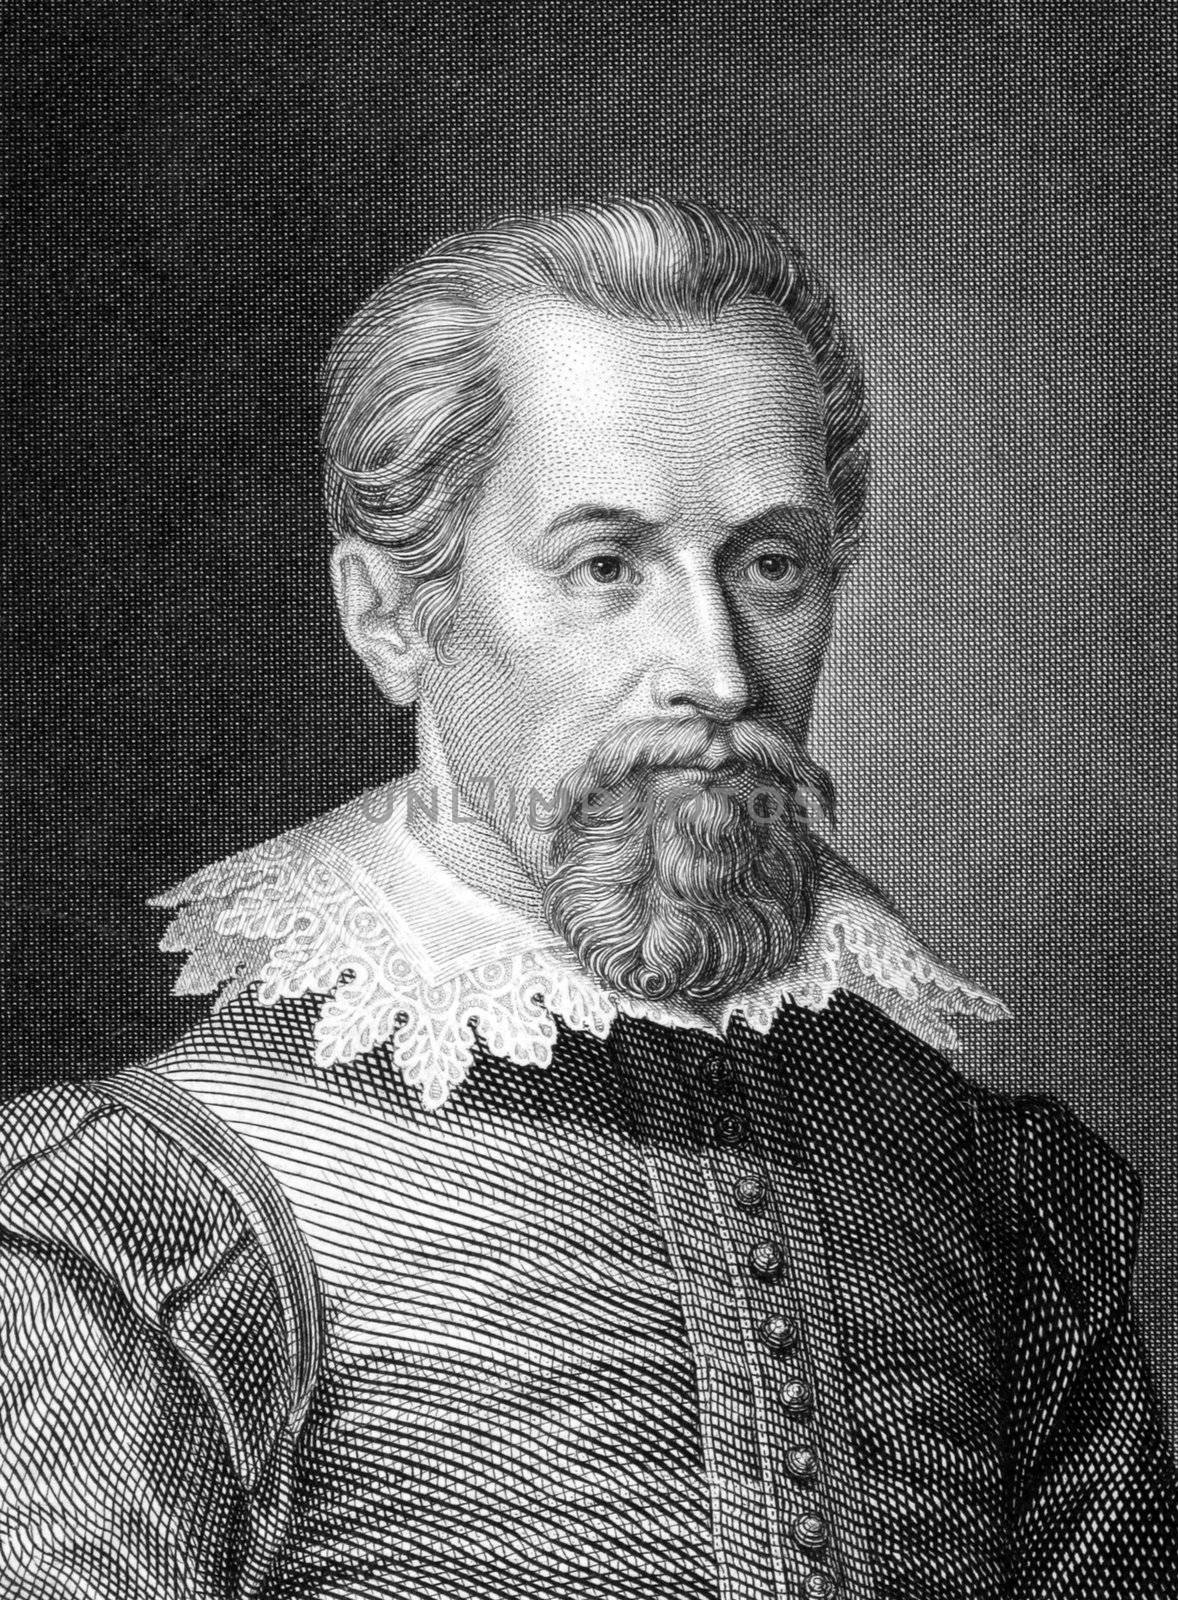 Johannes Kepler (1571-1630) on engraving from 1859.  German mathematician, astronomer and astrologer. Engraved by C.Barth and published in Meyers Konversations-Lexikon, Germany,1859.